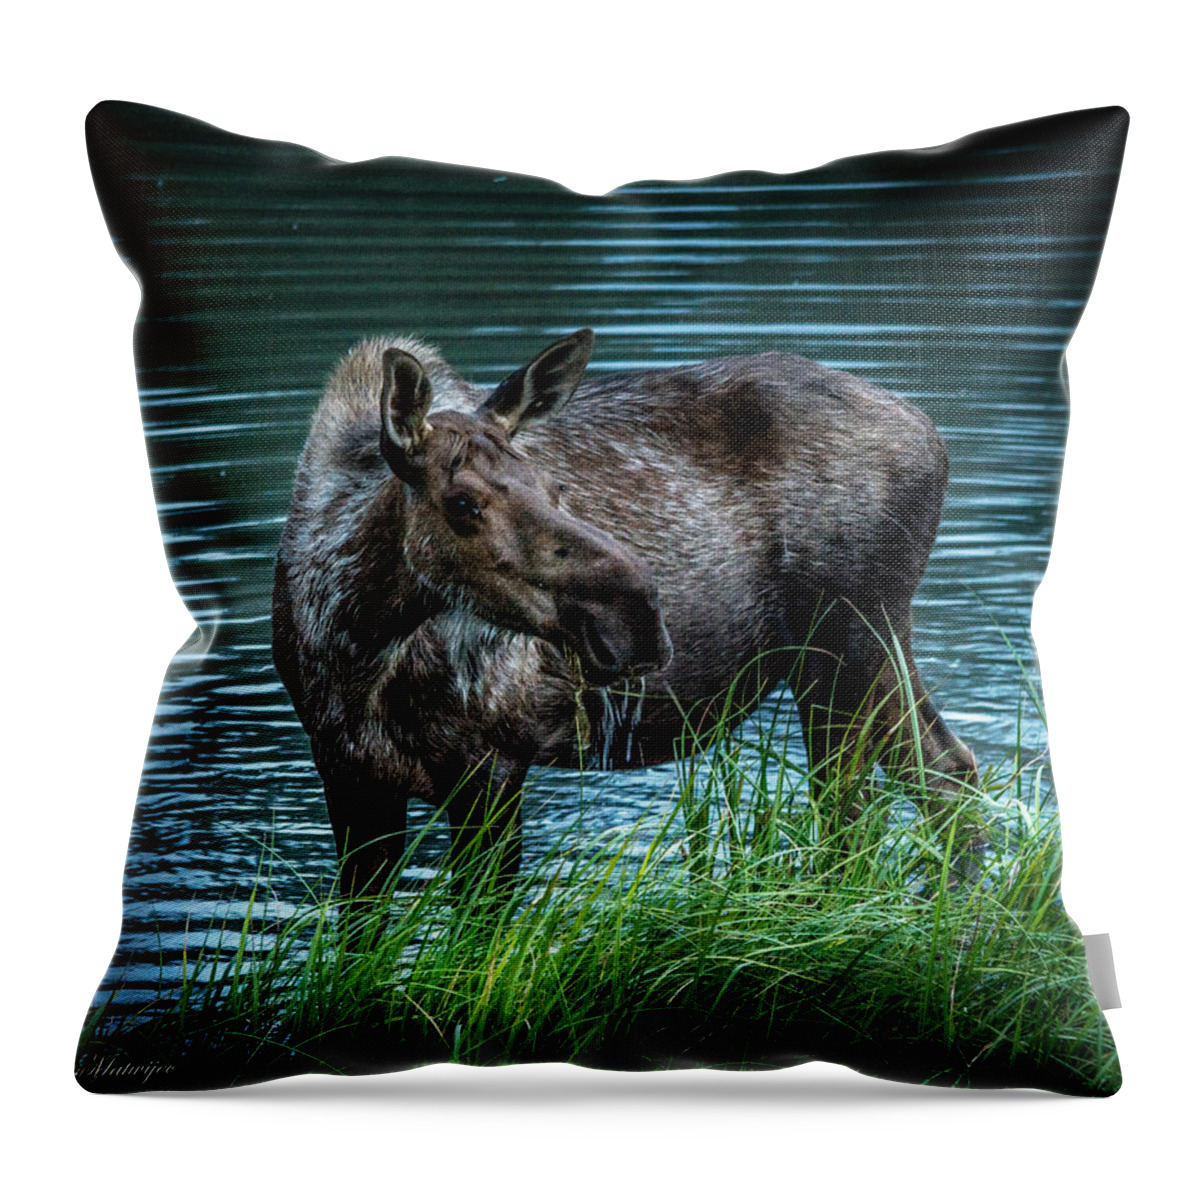 Moose Throw Pillow featuring the photograph Moose In the Water by Andrew Matwijec